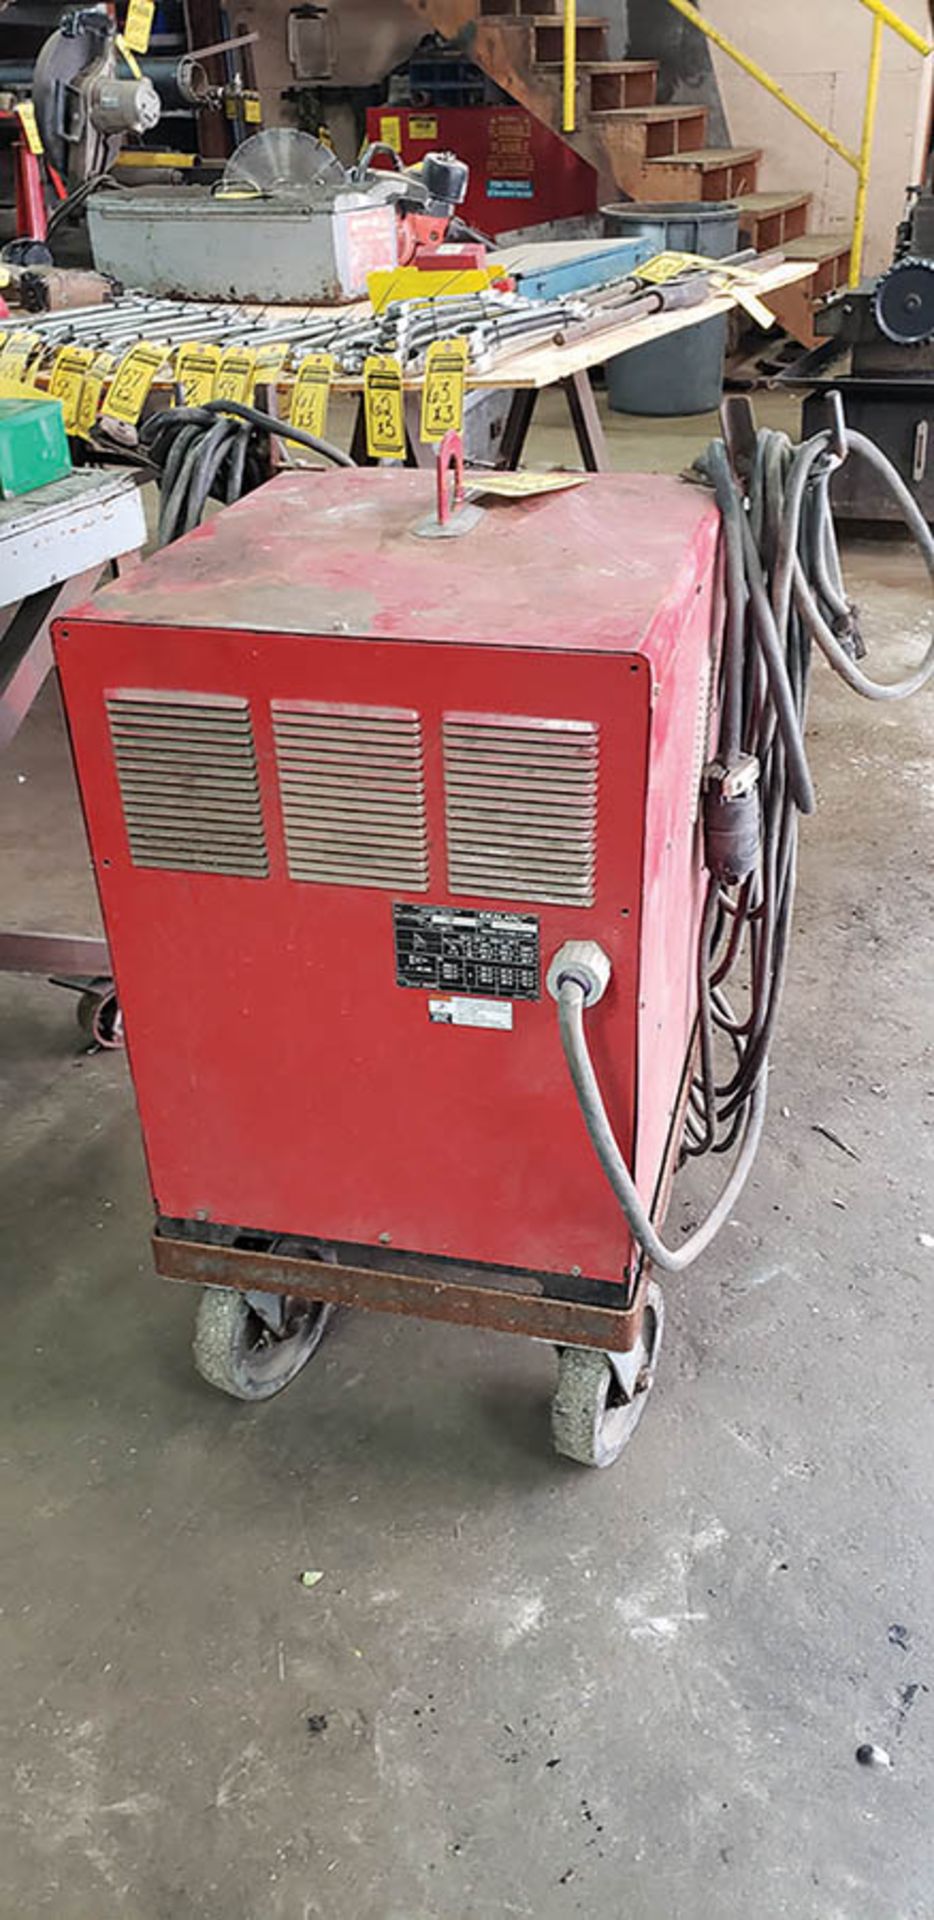 LINCOLN ELECTRIC IDEALARC 250 CC AC/DC ARC WELDER, S/N C1950400243 - Image 2 of 2